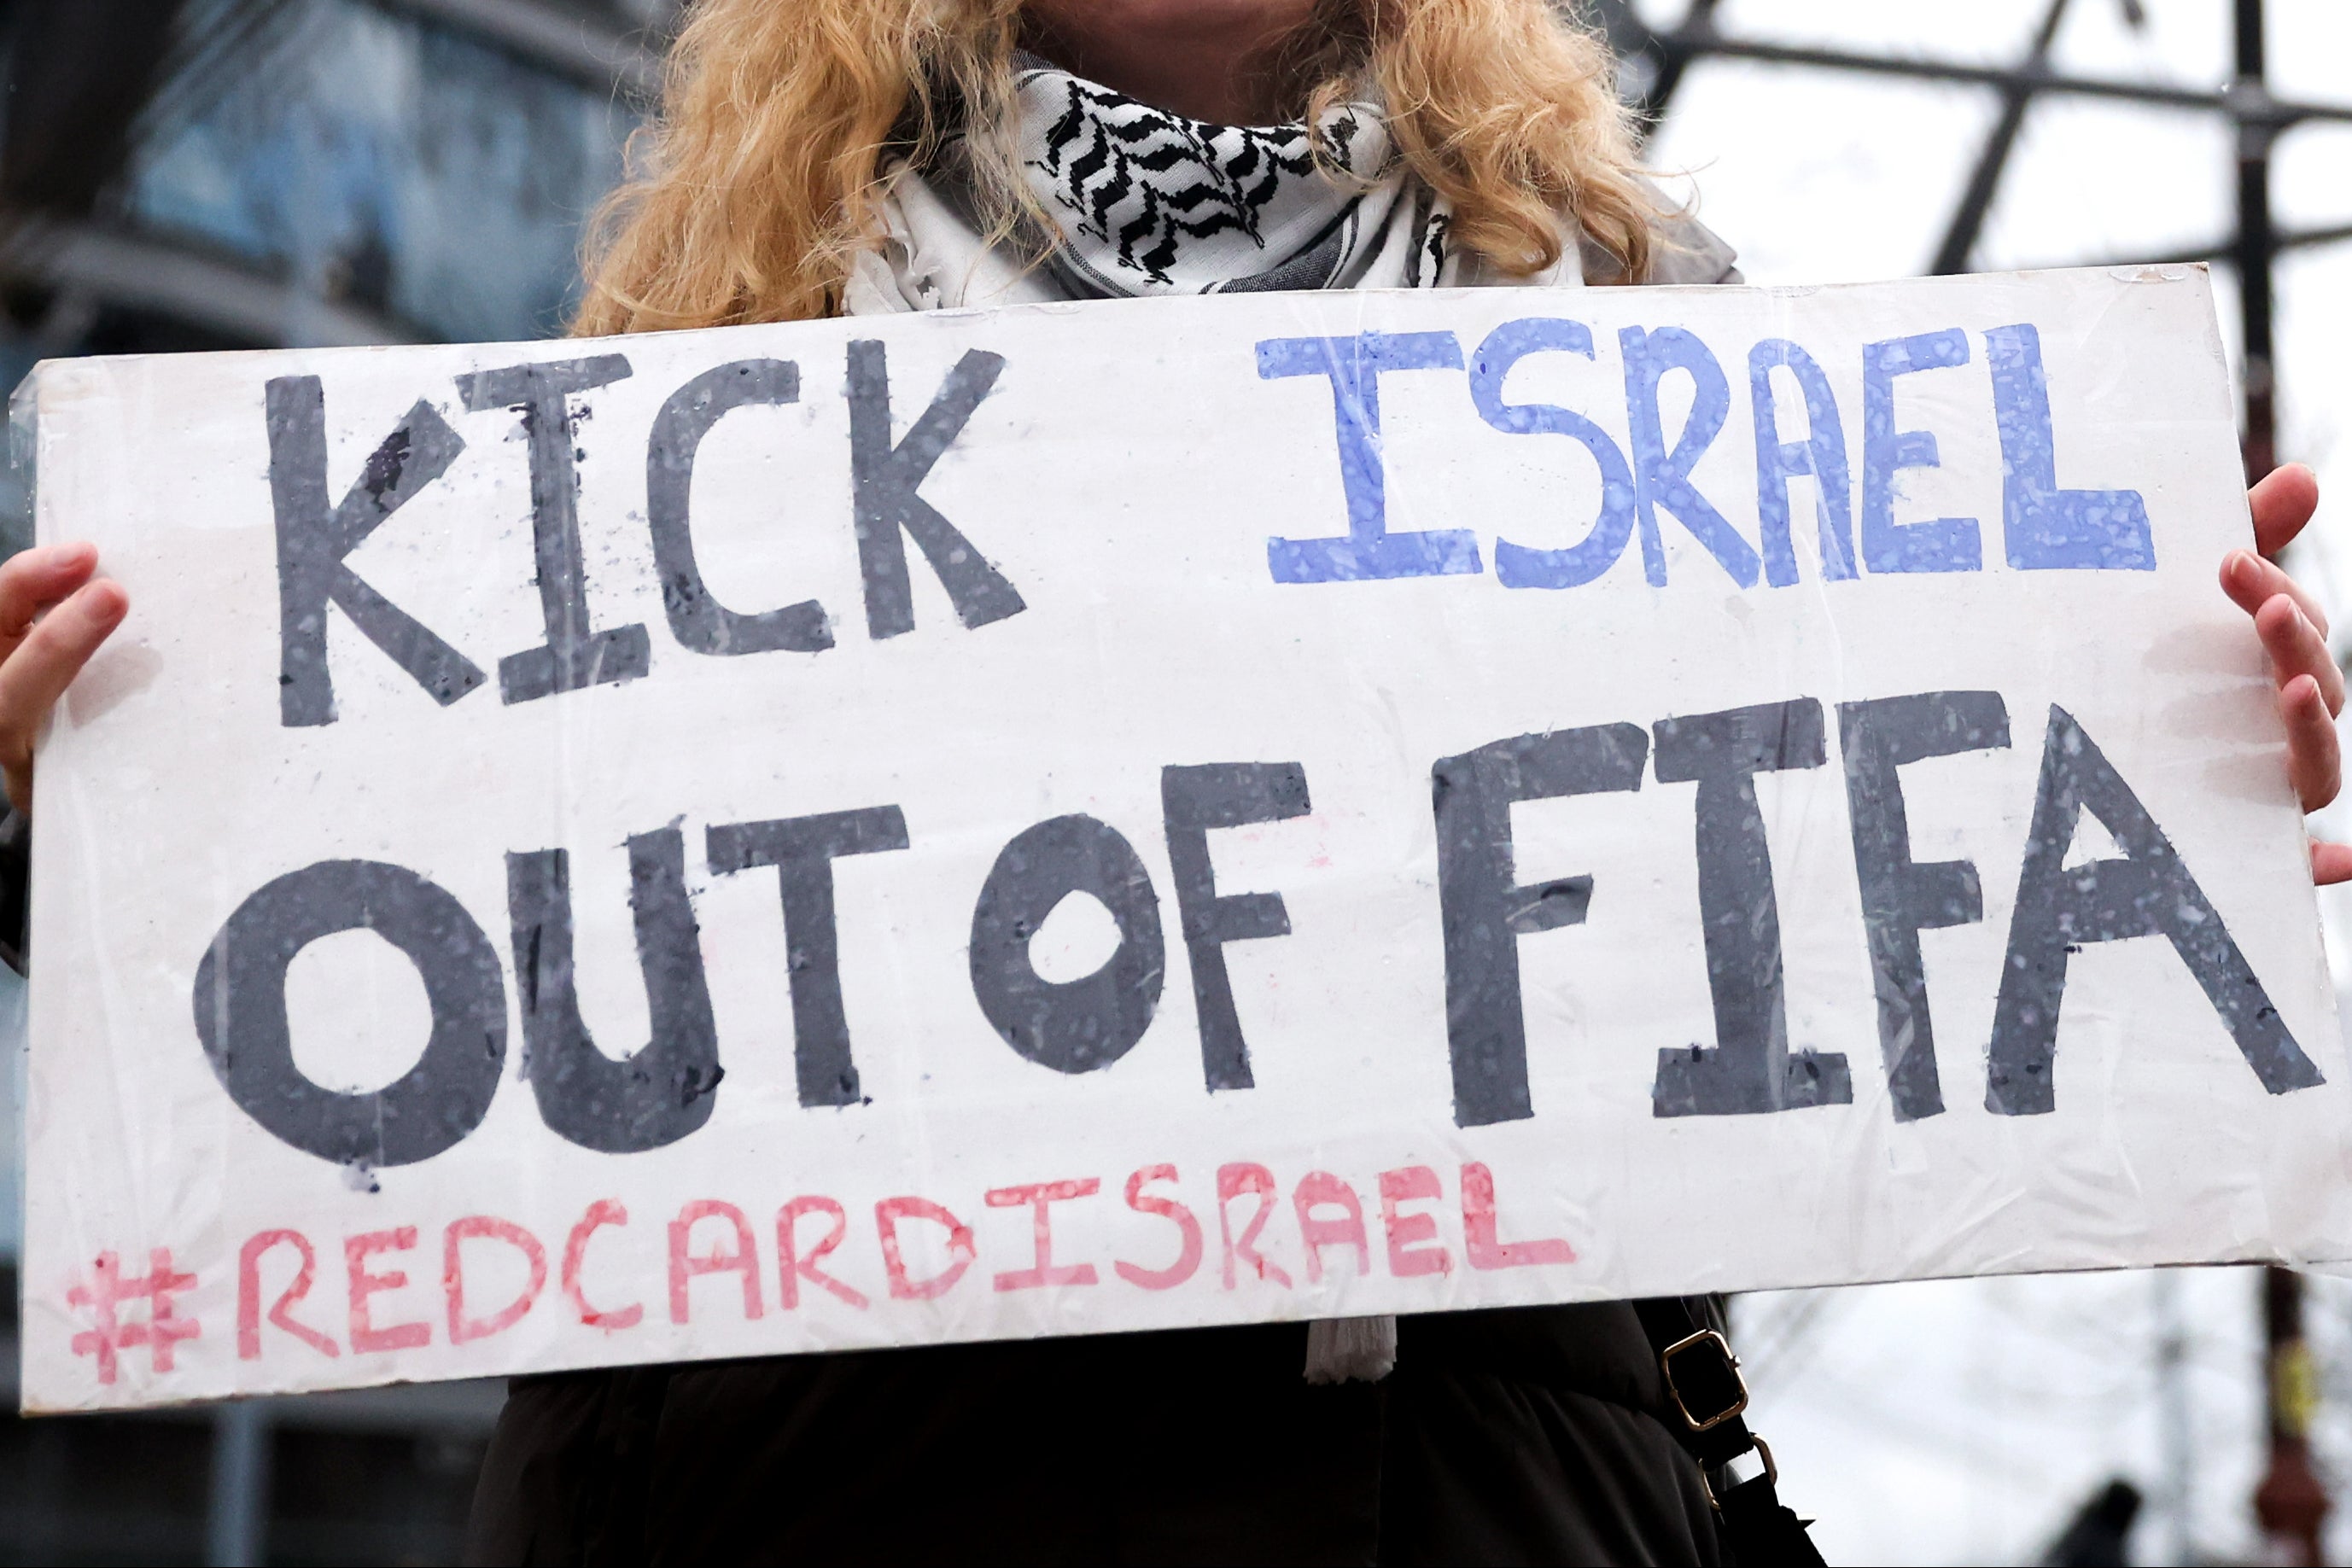 Palestine FA demands Israel be kicked out of Fifa | The Independent